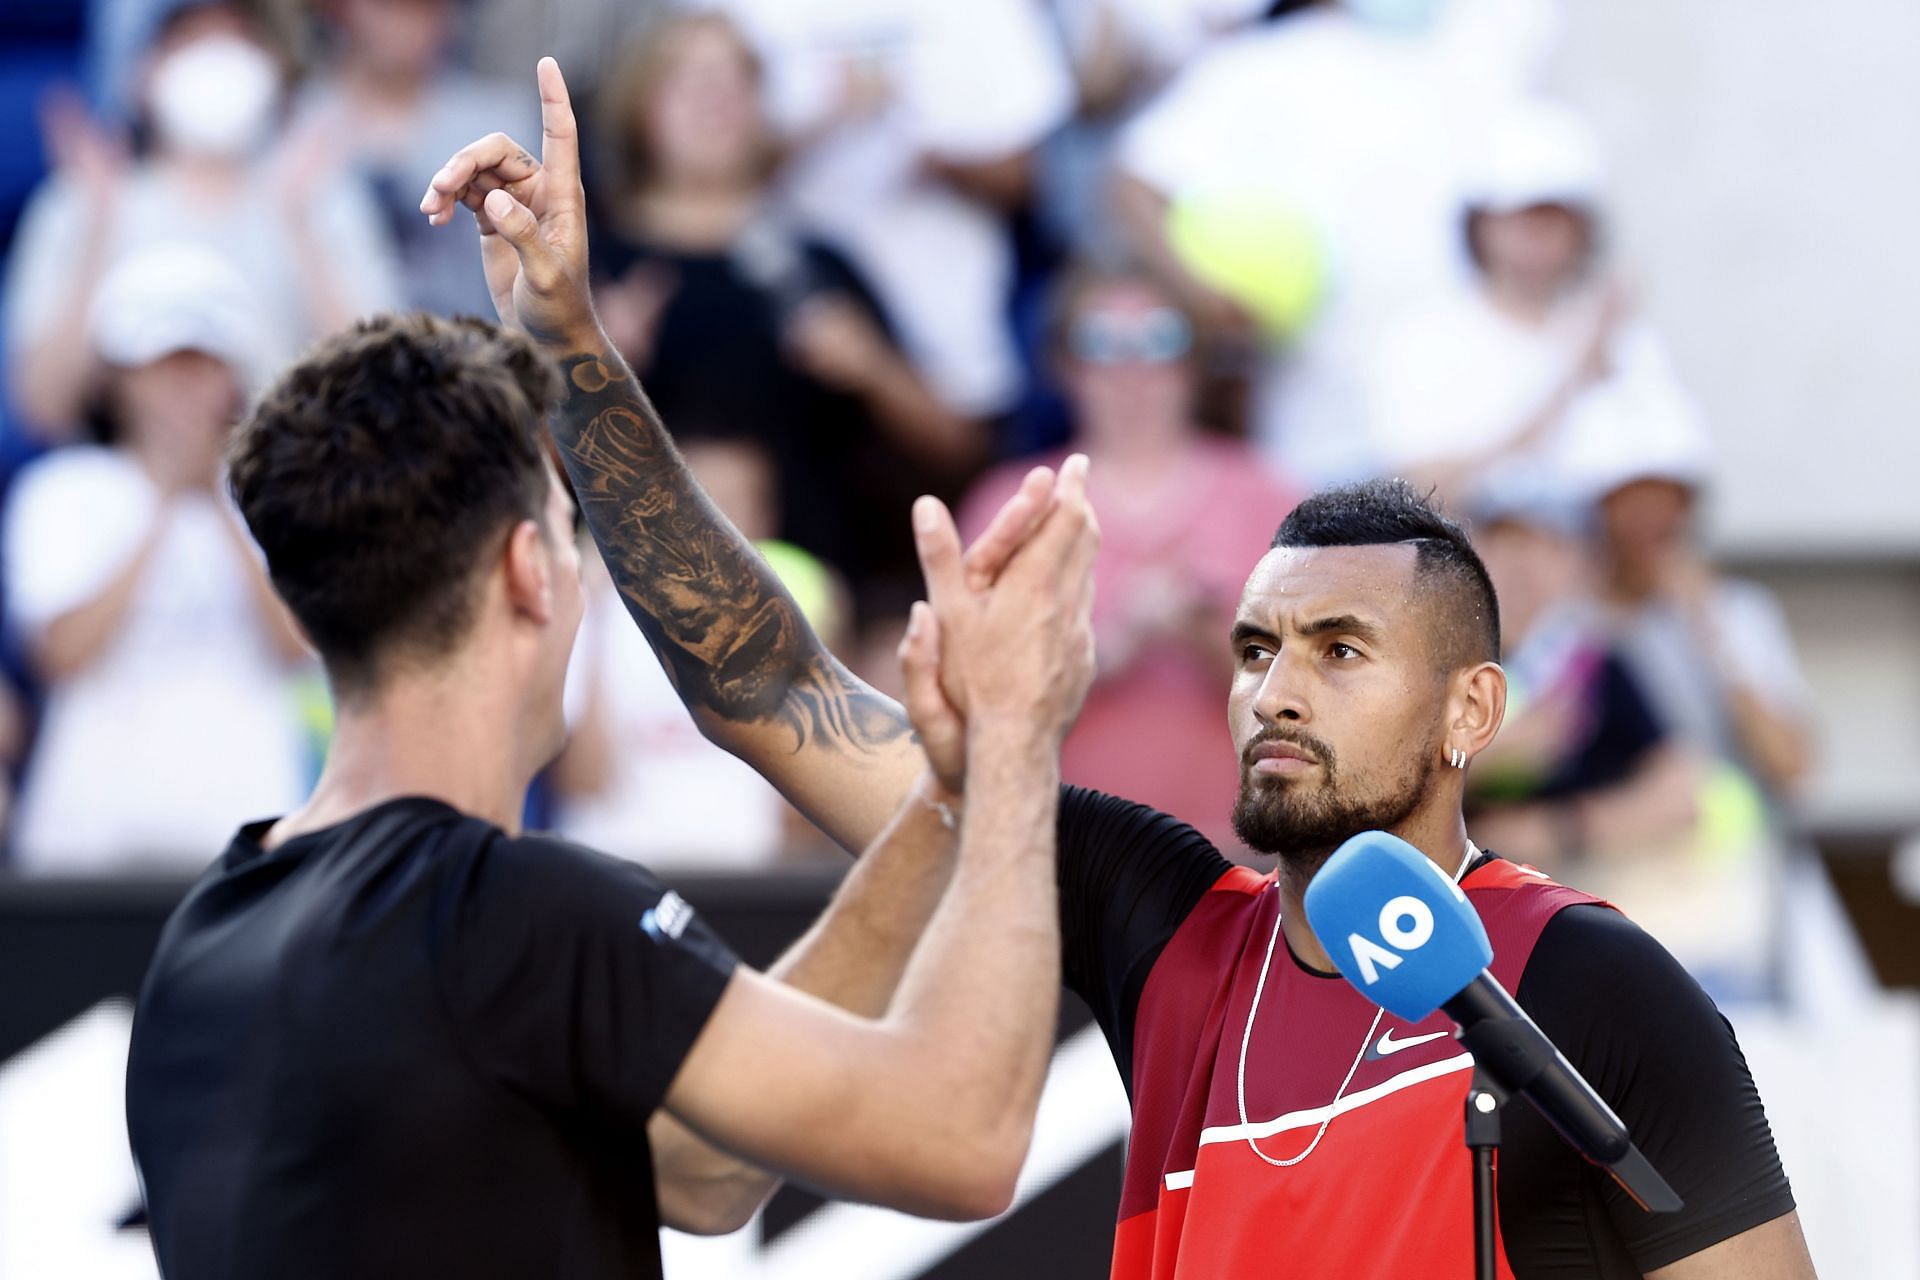 Kyrgios said he would love to team up Kokkinakis later this year